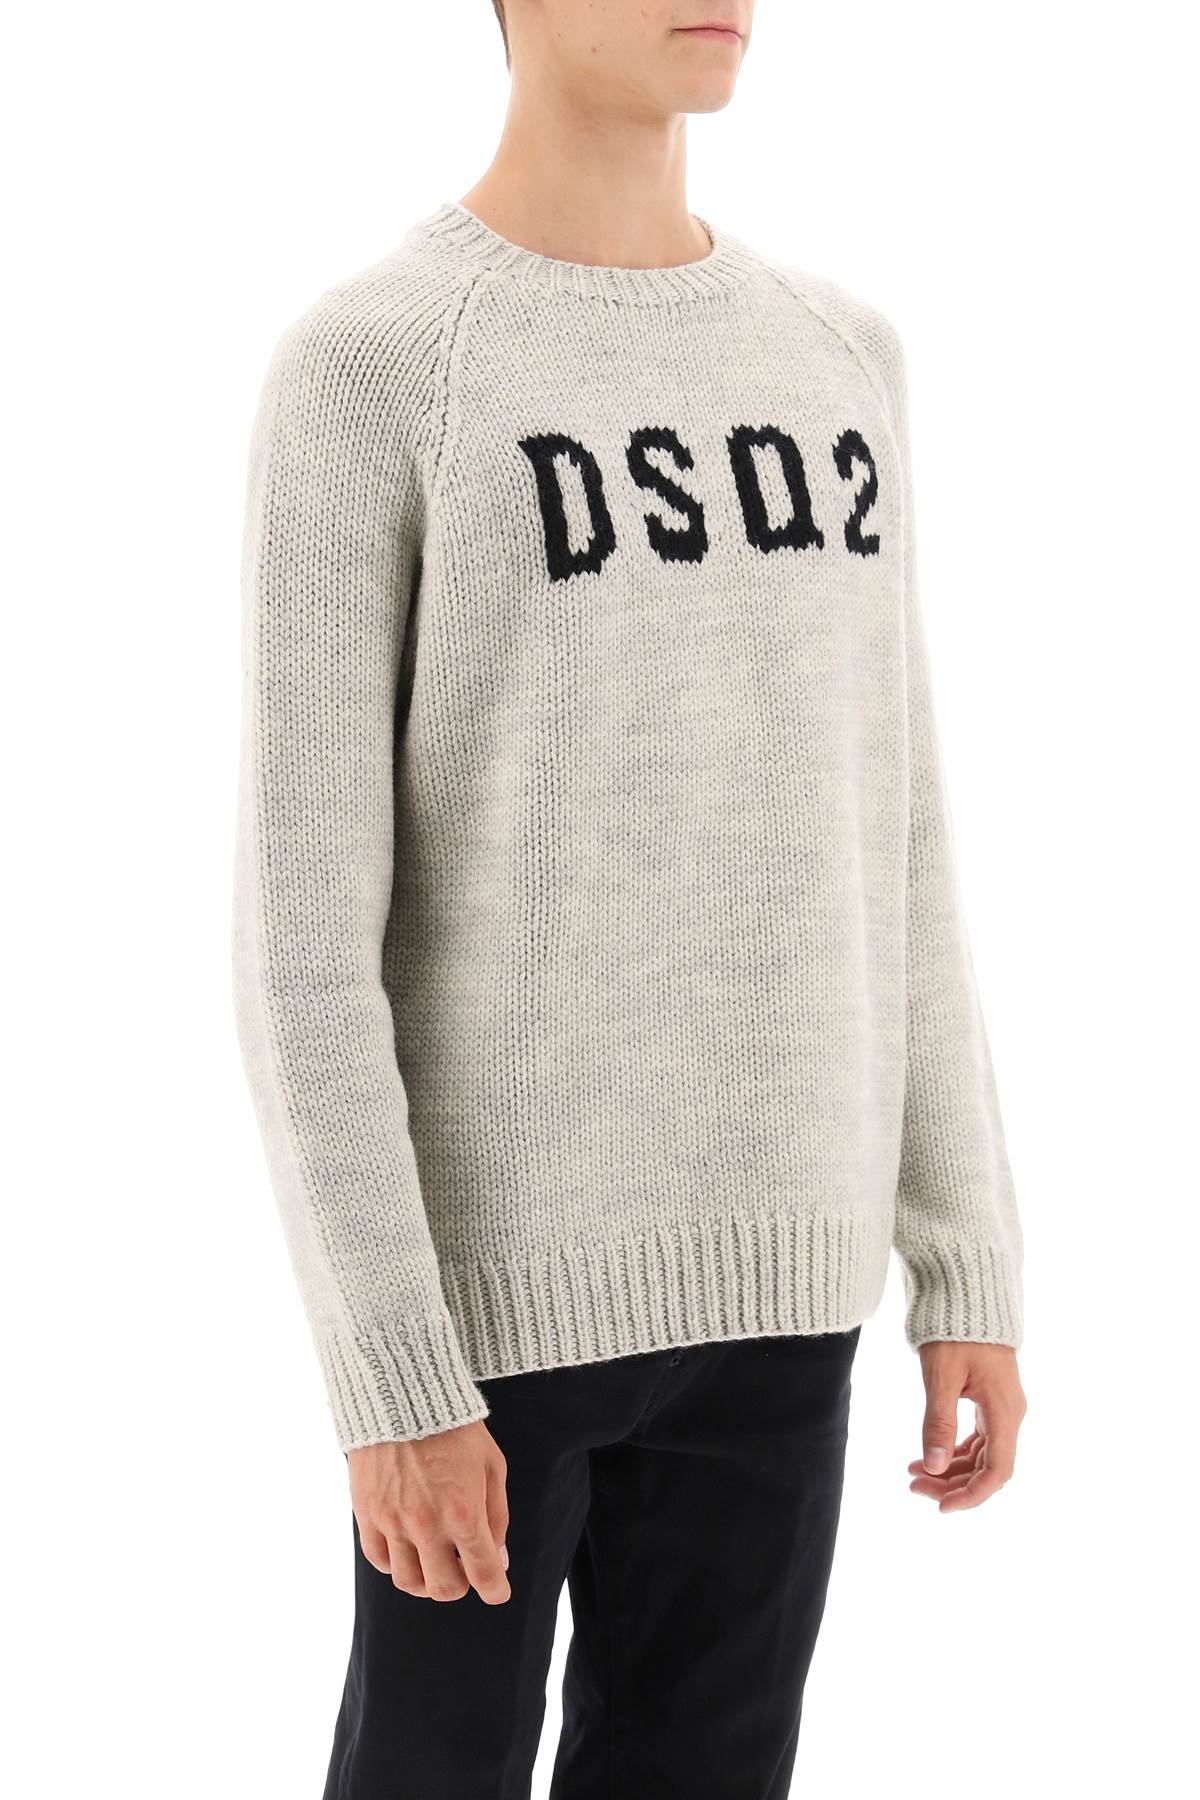 DSQUARED2 Men's Grey Raglan-Sleeve Sweater - FW23 Collection